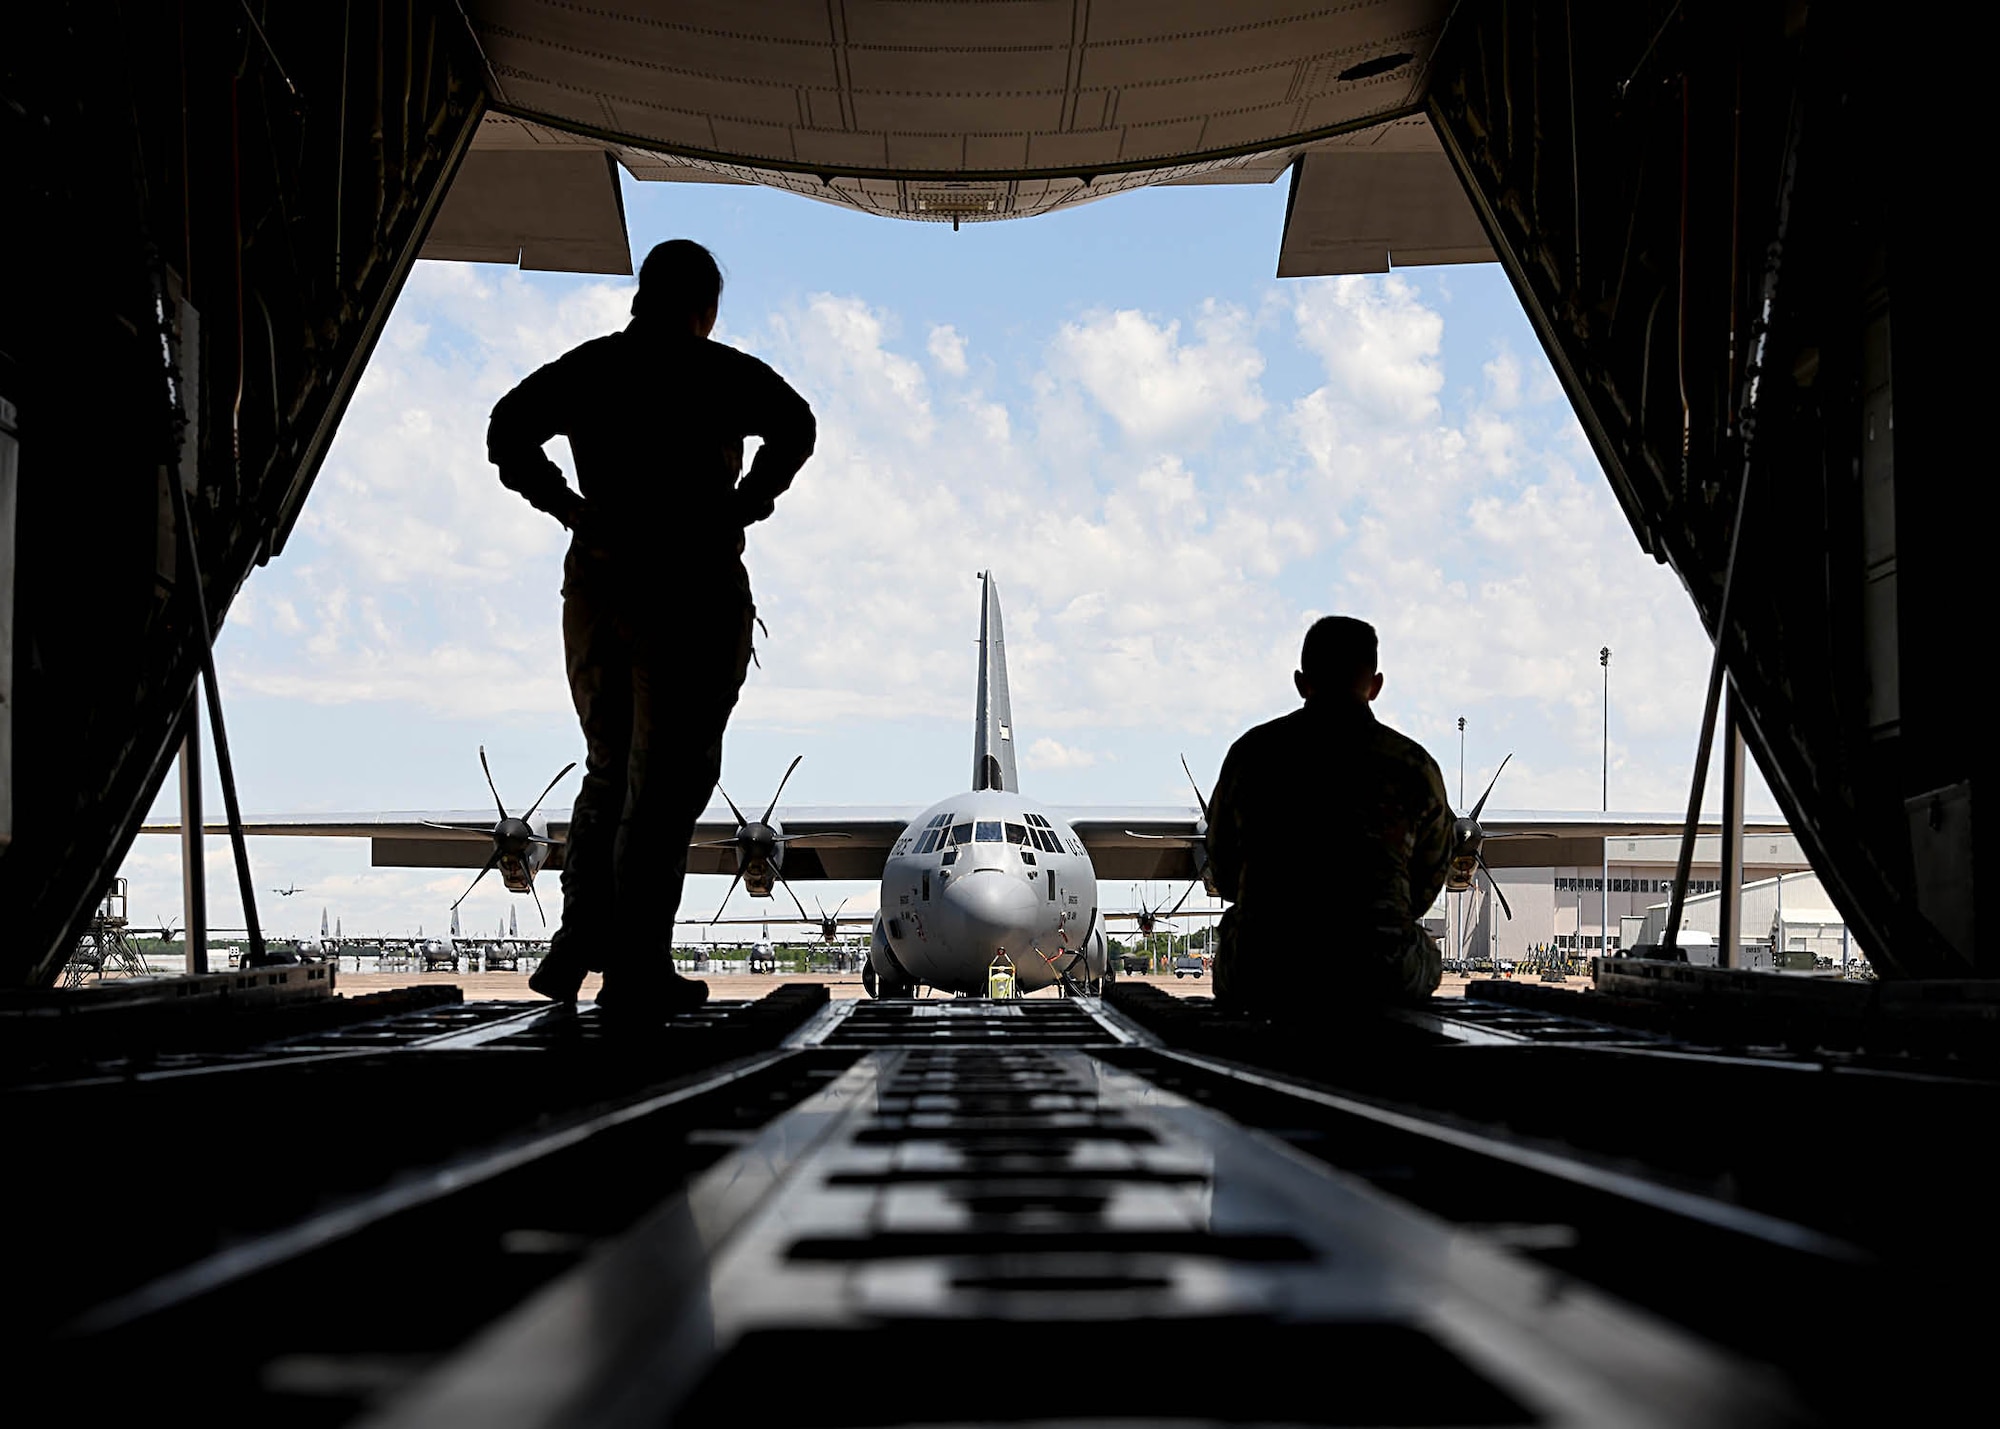 Airmen sit on the ramp of an aircraft before take off